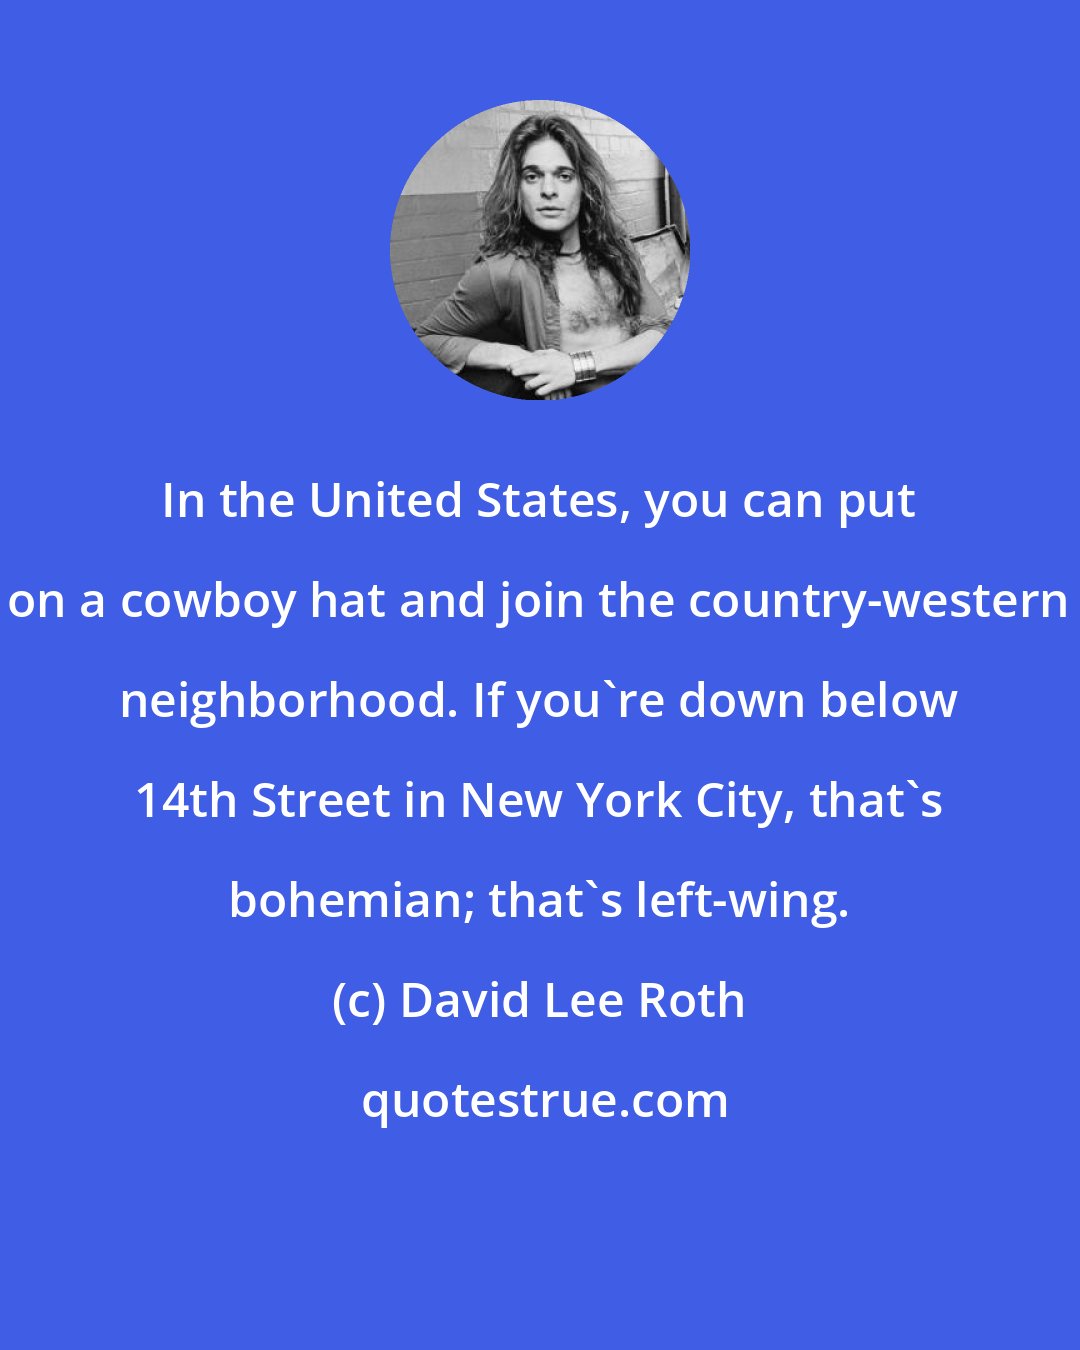 David Lee Roth: In the United States, you can put on a cowboy hat and join the country-western neighborhood. If you're down below 14th Street in New York City, that's bohemian; that's left-wing.